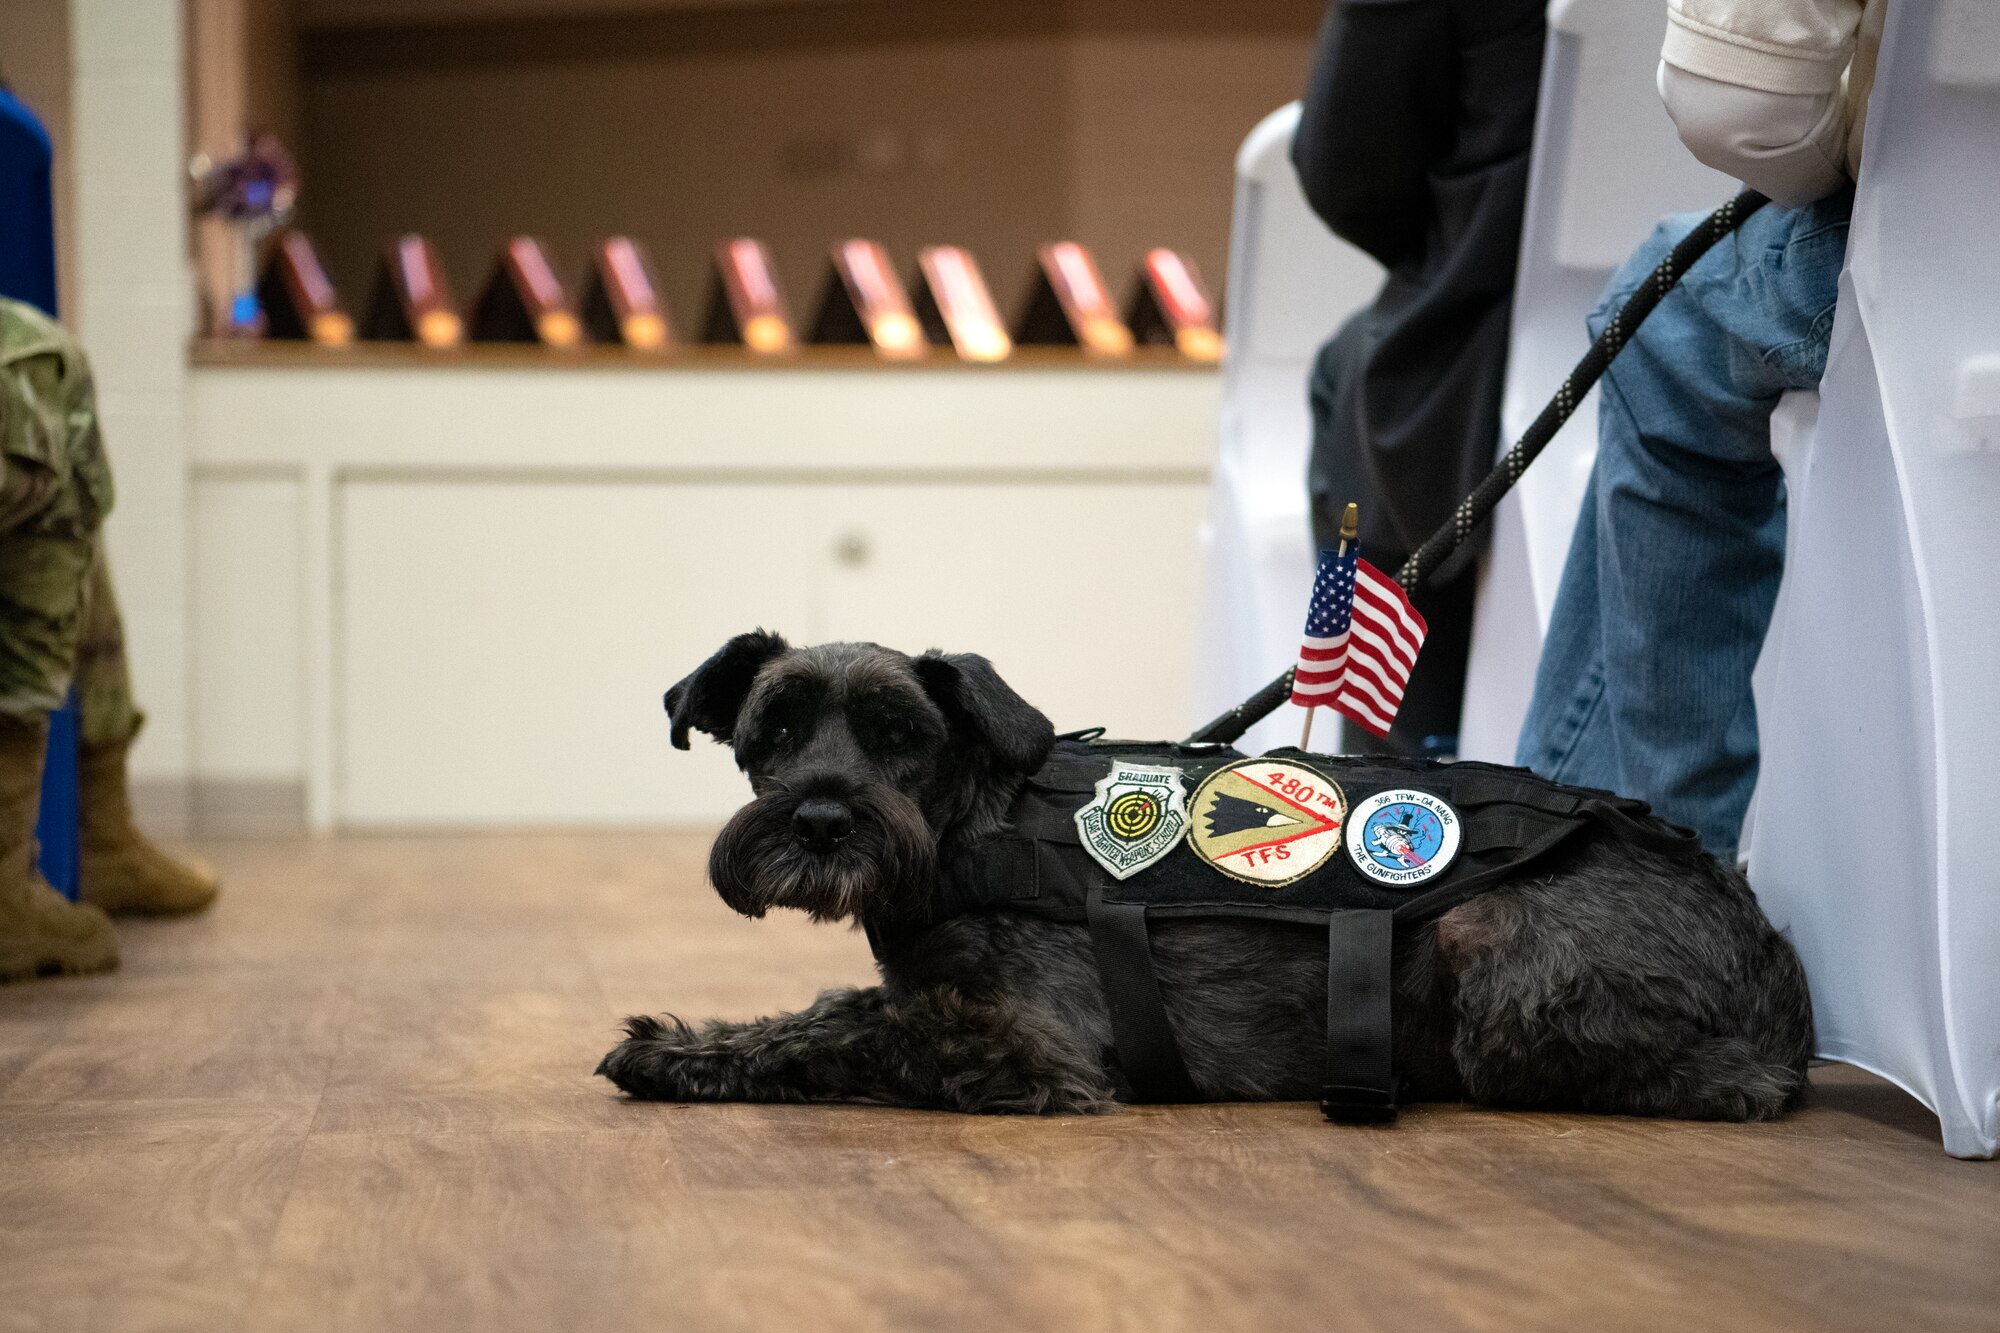 Sparky, a service dog, sits beside his owner during a Veterans Day ceremony in Sumter, S.C., Nov. 11, 2022. Sumter is home to a military population of over 31 thousand, over 16 thousand of whom are military retirees. (U.S. Air Force photo by Staff Sgt. Kelsey Owen)